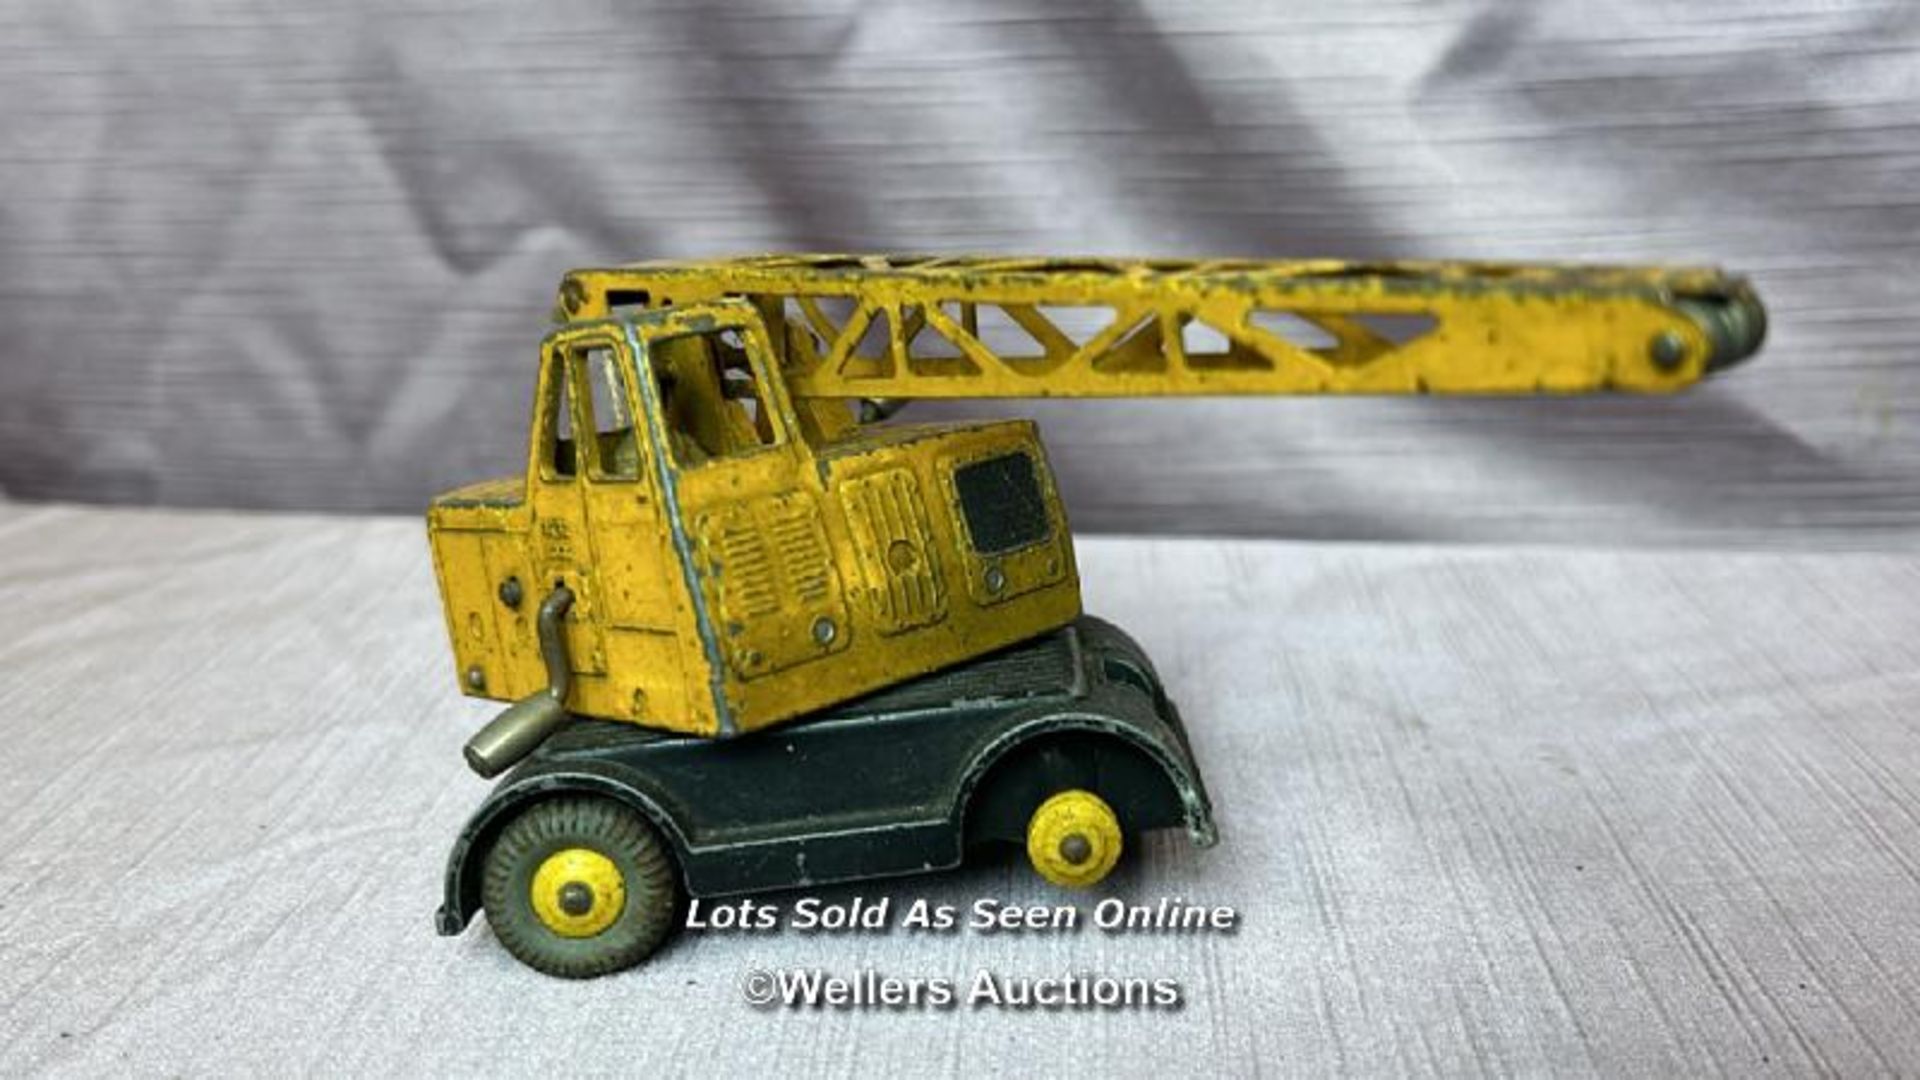 DINKY SUPERTOYS COLES MOBILE CRANE TOGETHER WITH A LESNEY CEMENT MIXER - Image 2 of 5